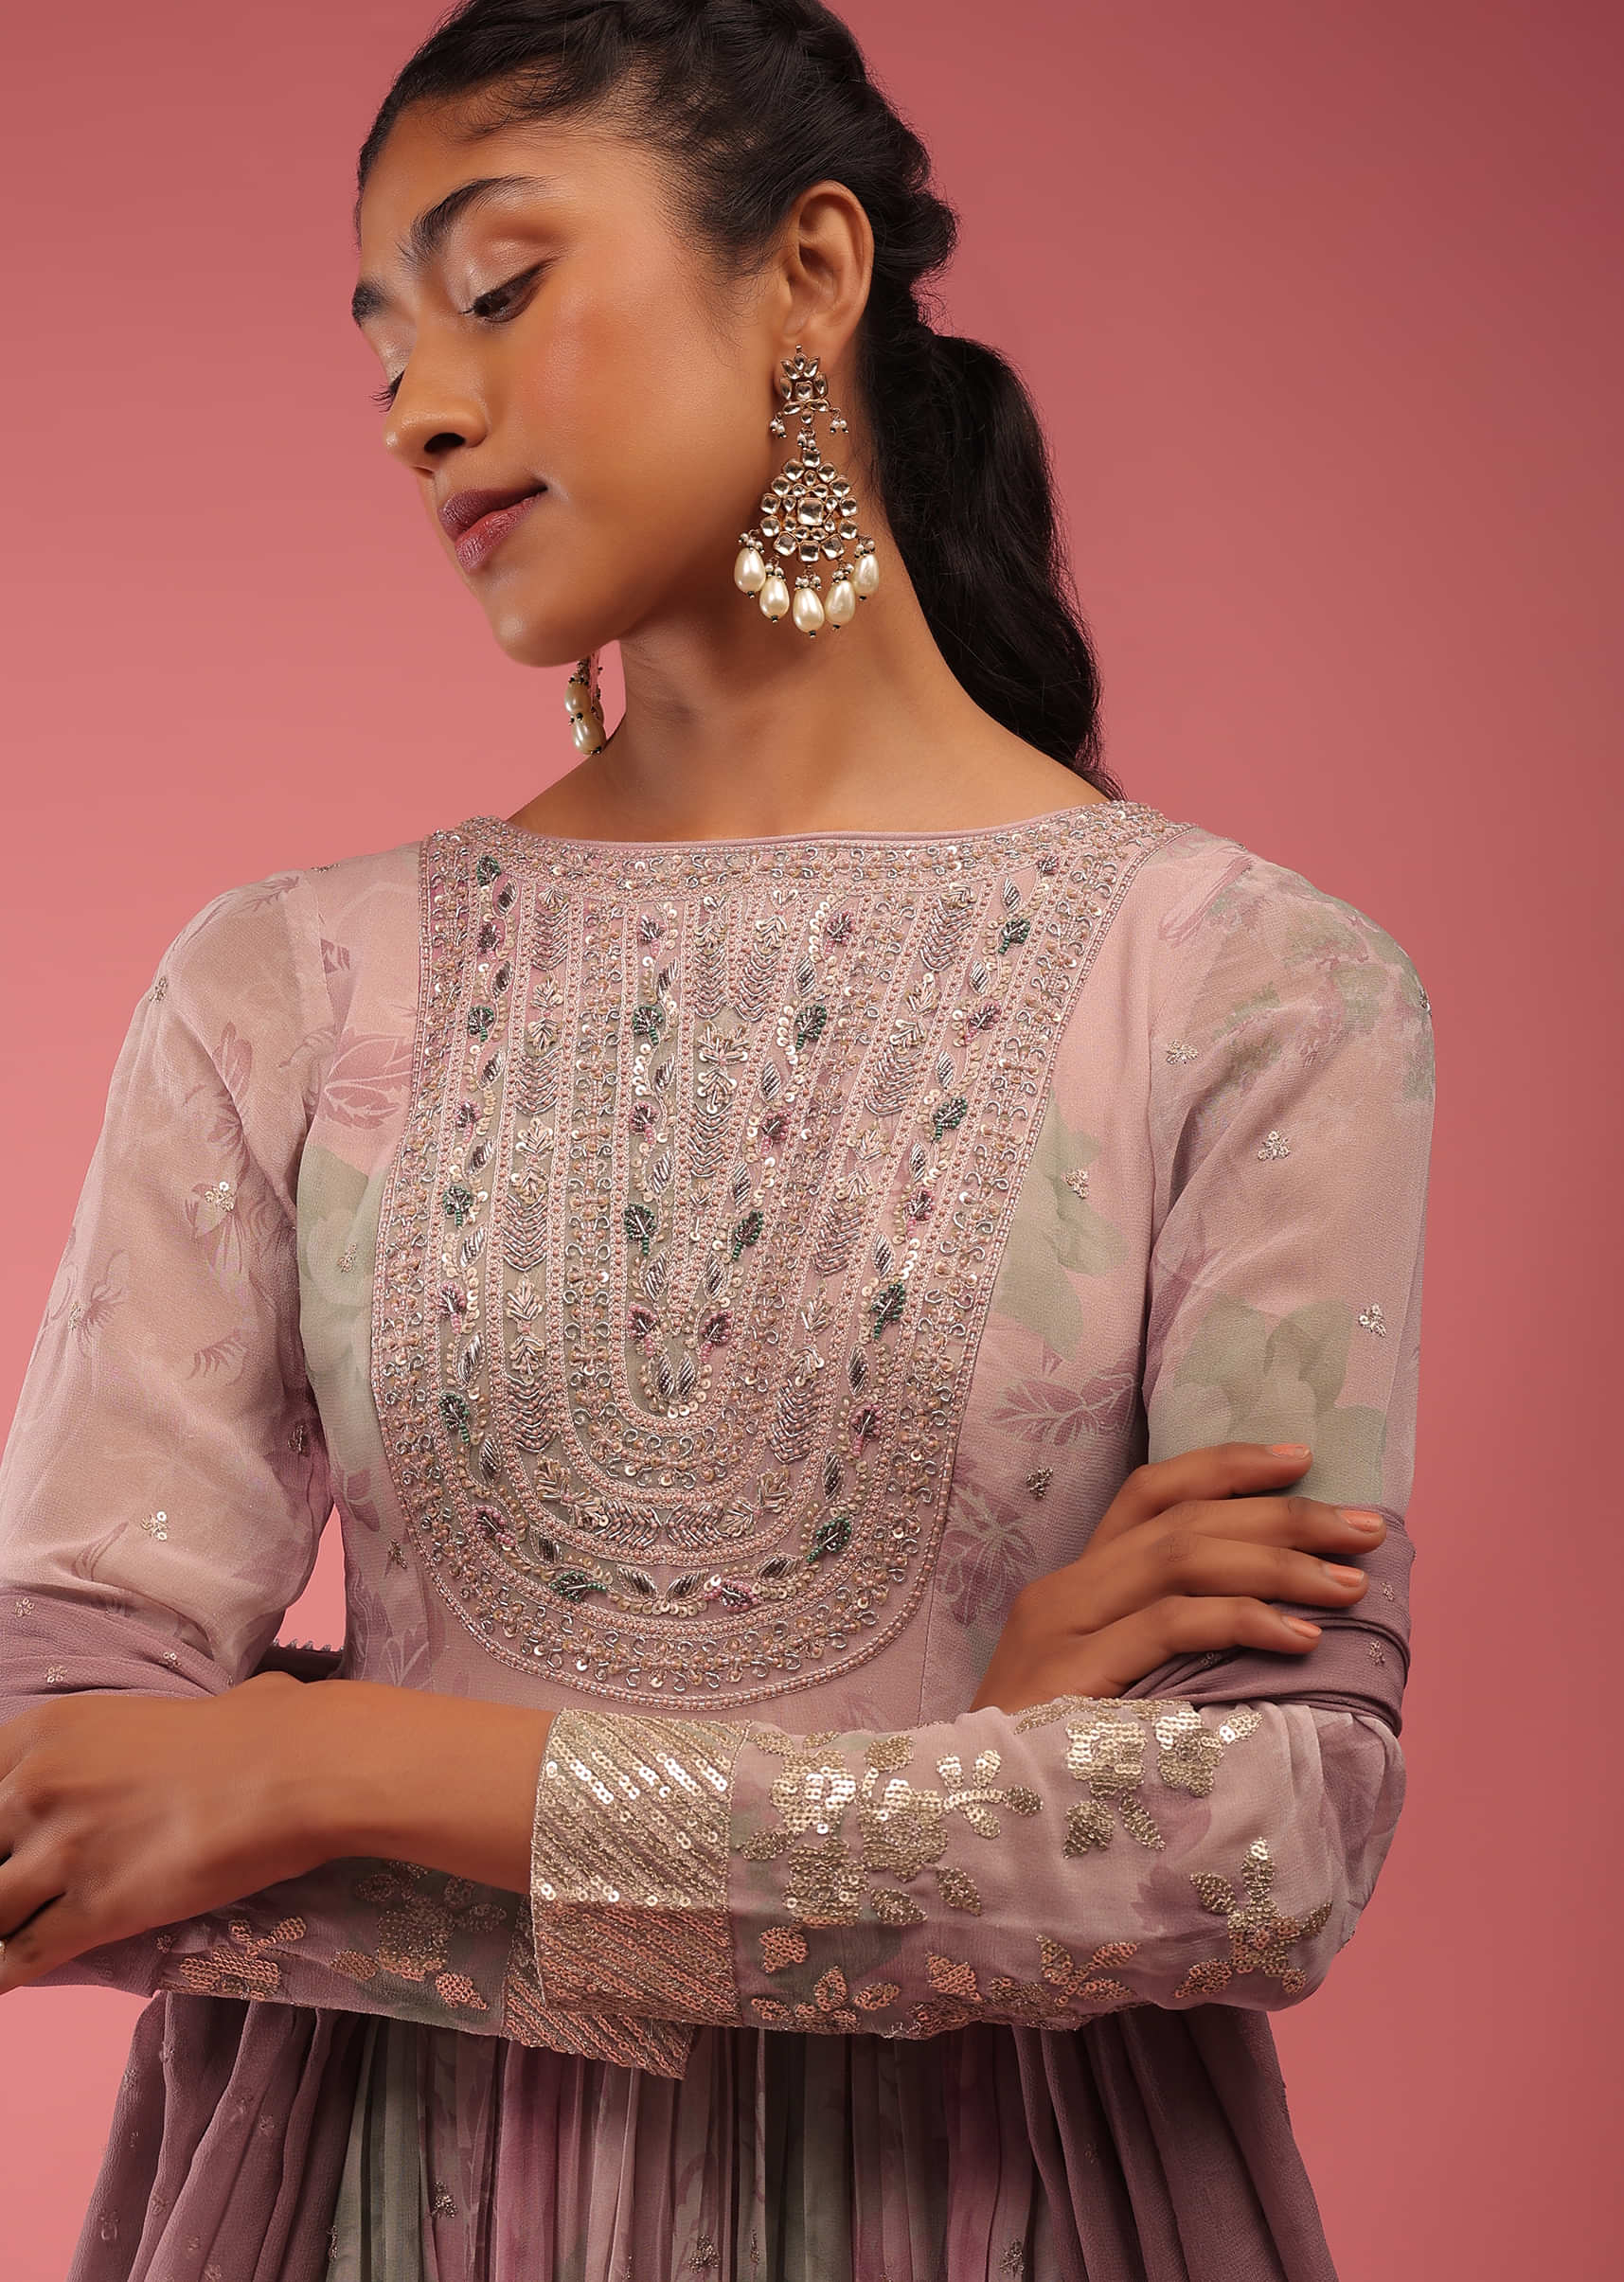 Dusty Lilac In Multi-Color Floral Print Anarkali Suit, Crafted In Full Sleeves With Sequins In Flora Motifs Around The Yoke